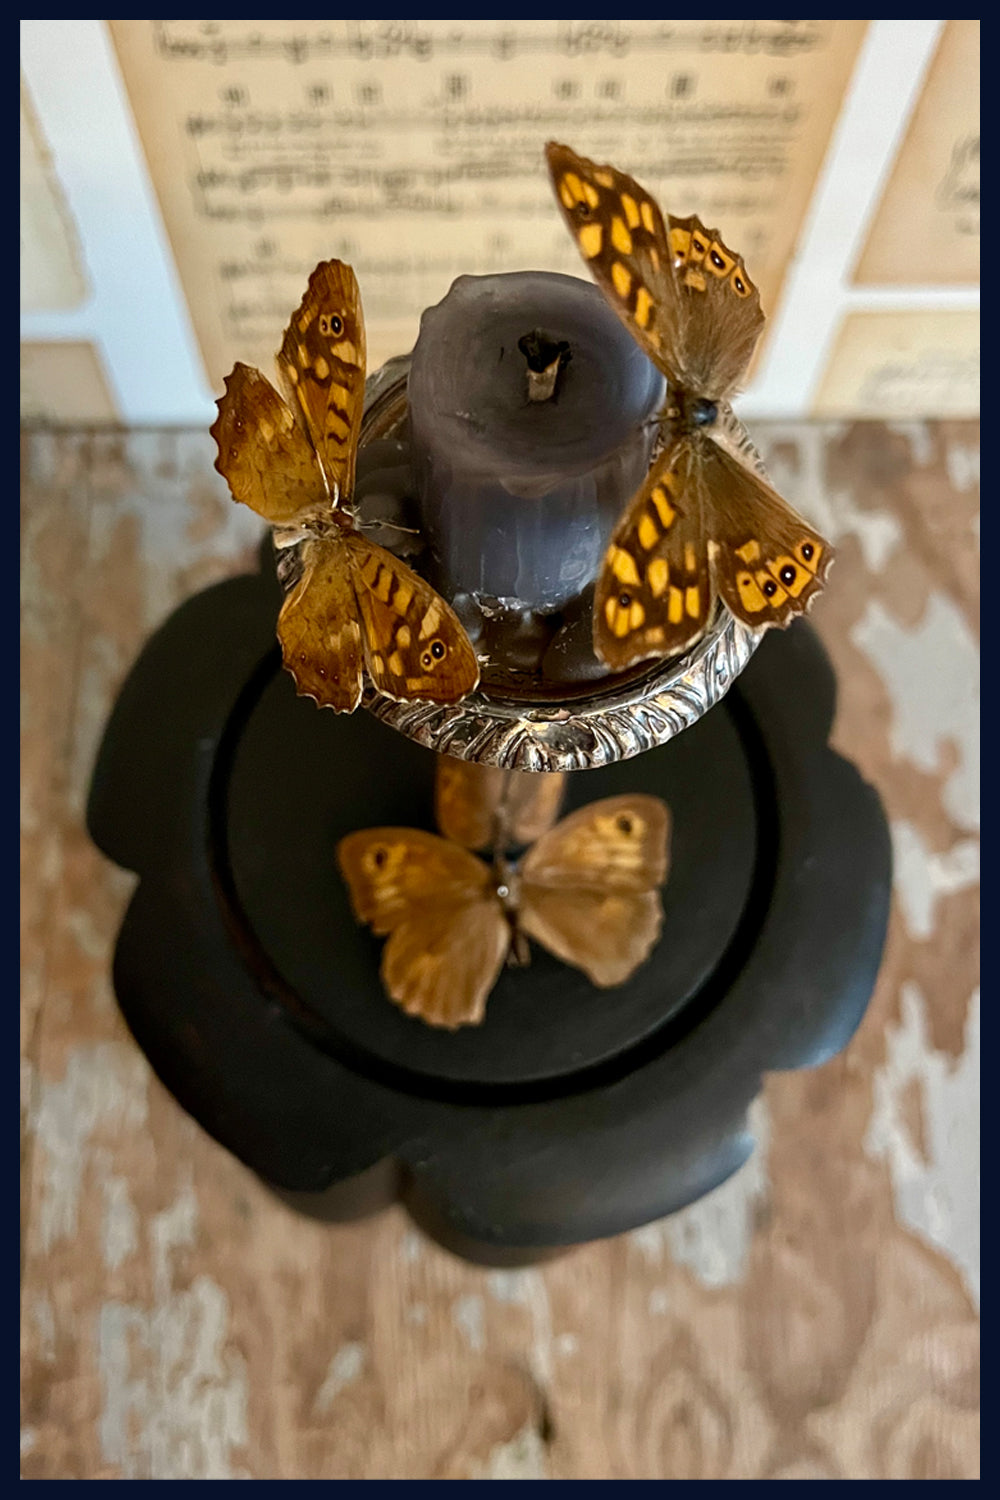 Enigma Variations Collection: Silver & Copper Antique Candlestick with a Vintage Butterfly in an Antique Display Dome